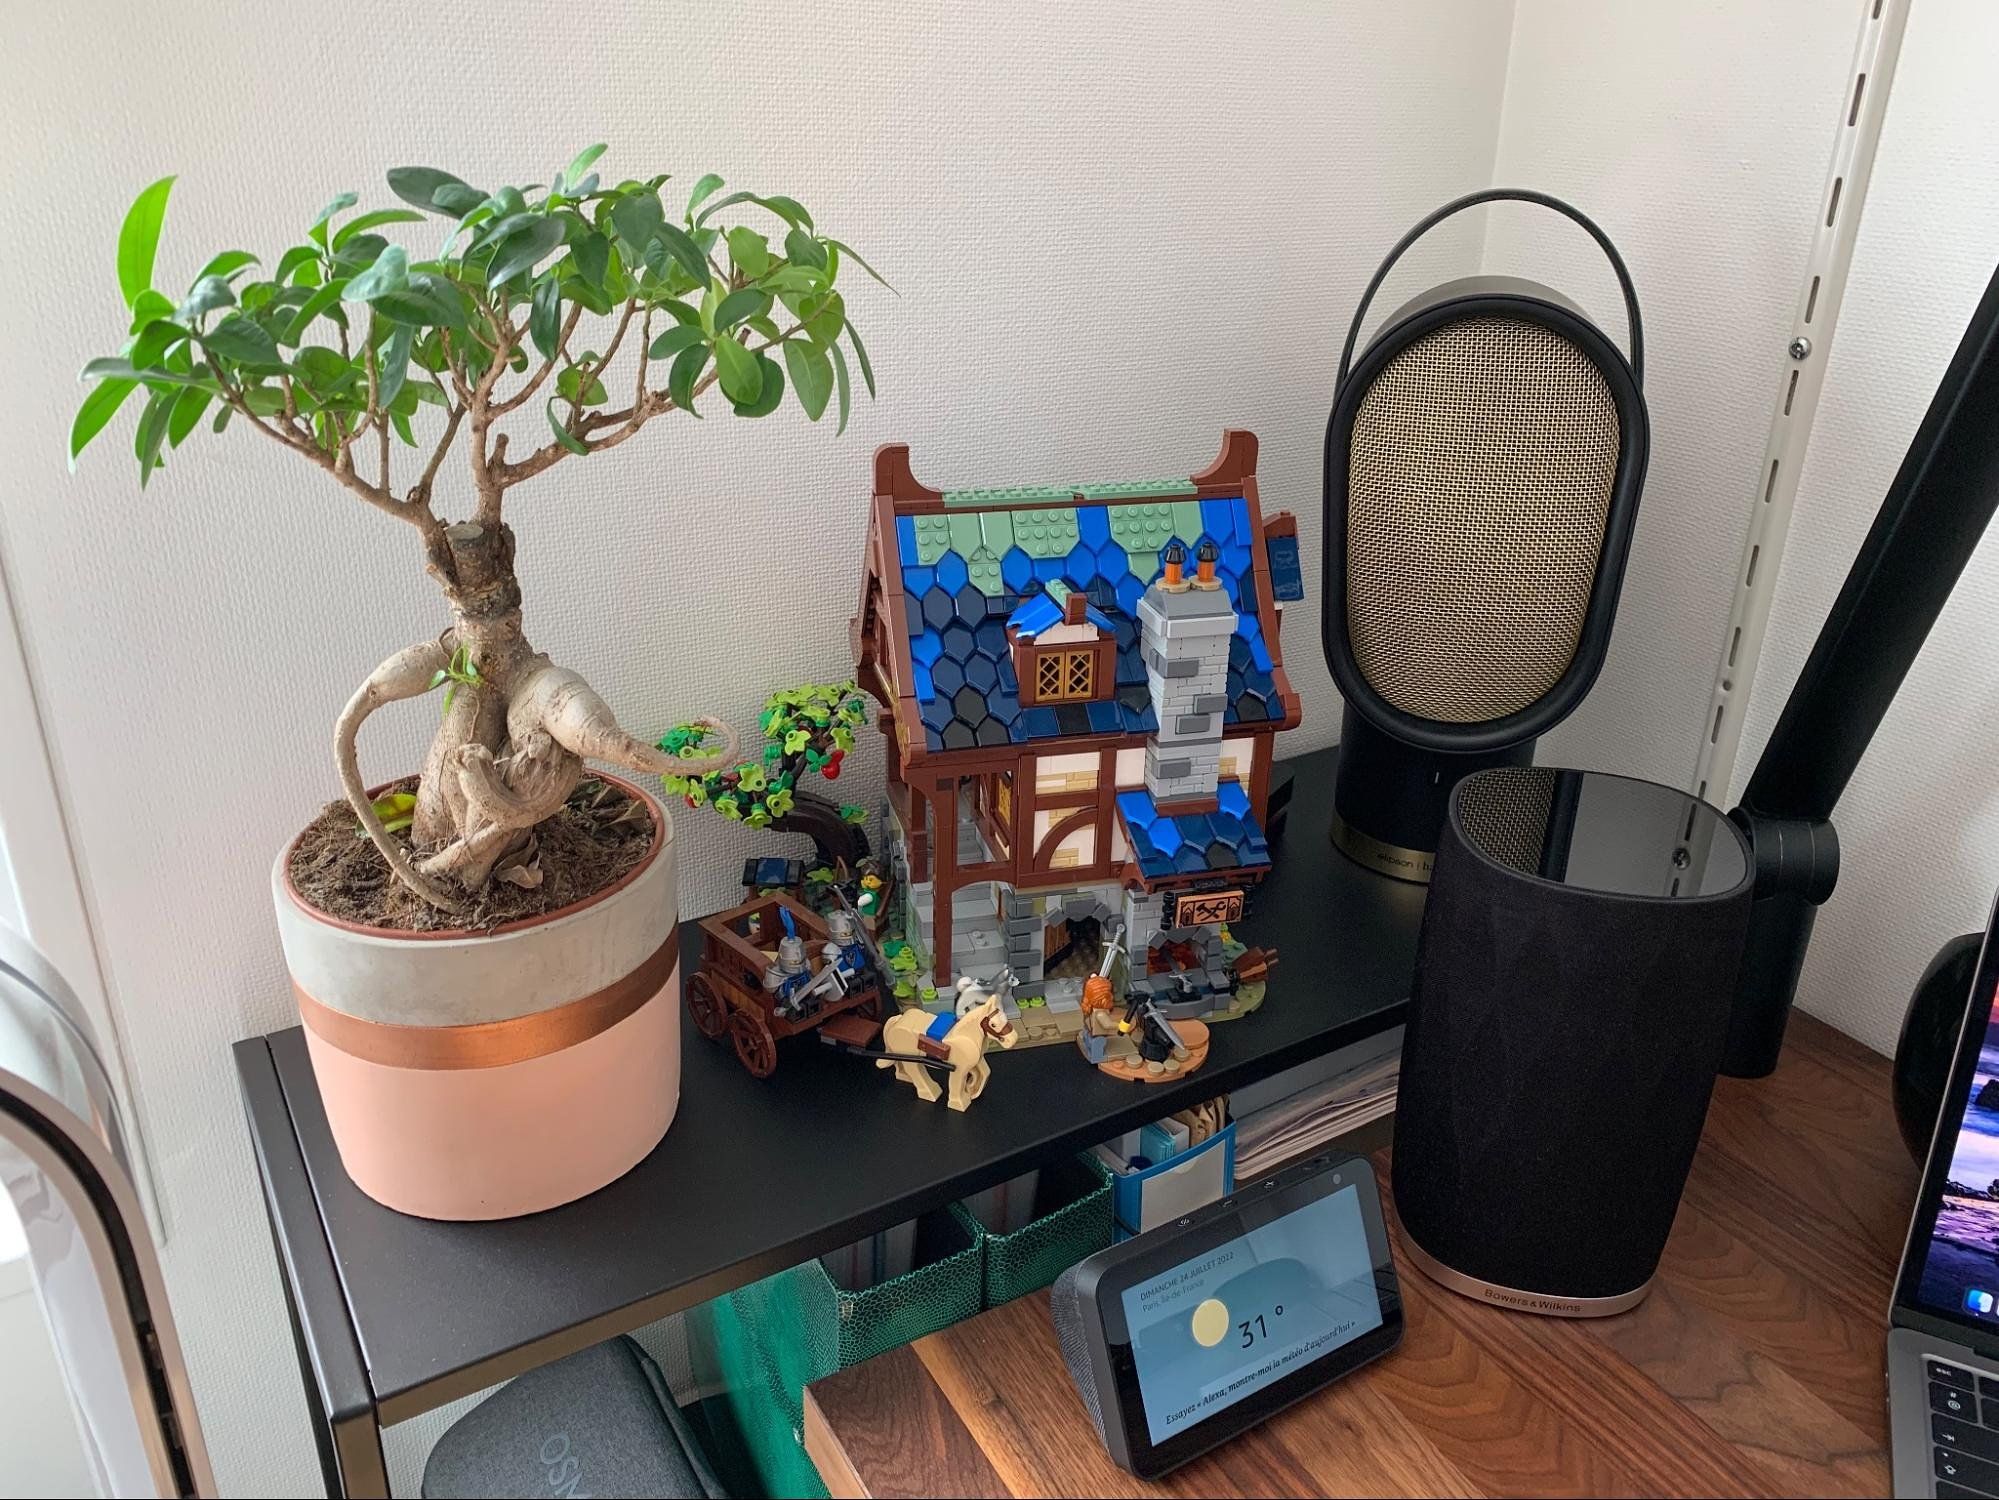 A Bonsai tree and a Lego medieval forge in a home workspace in Paris, France